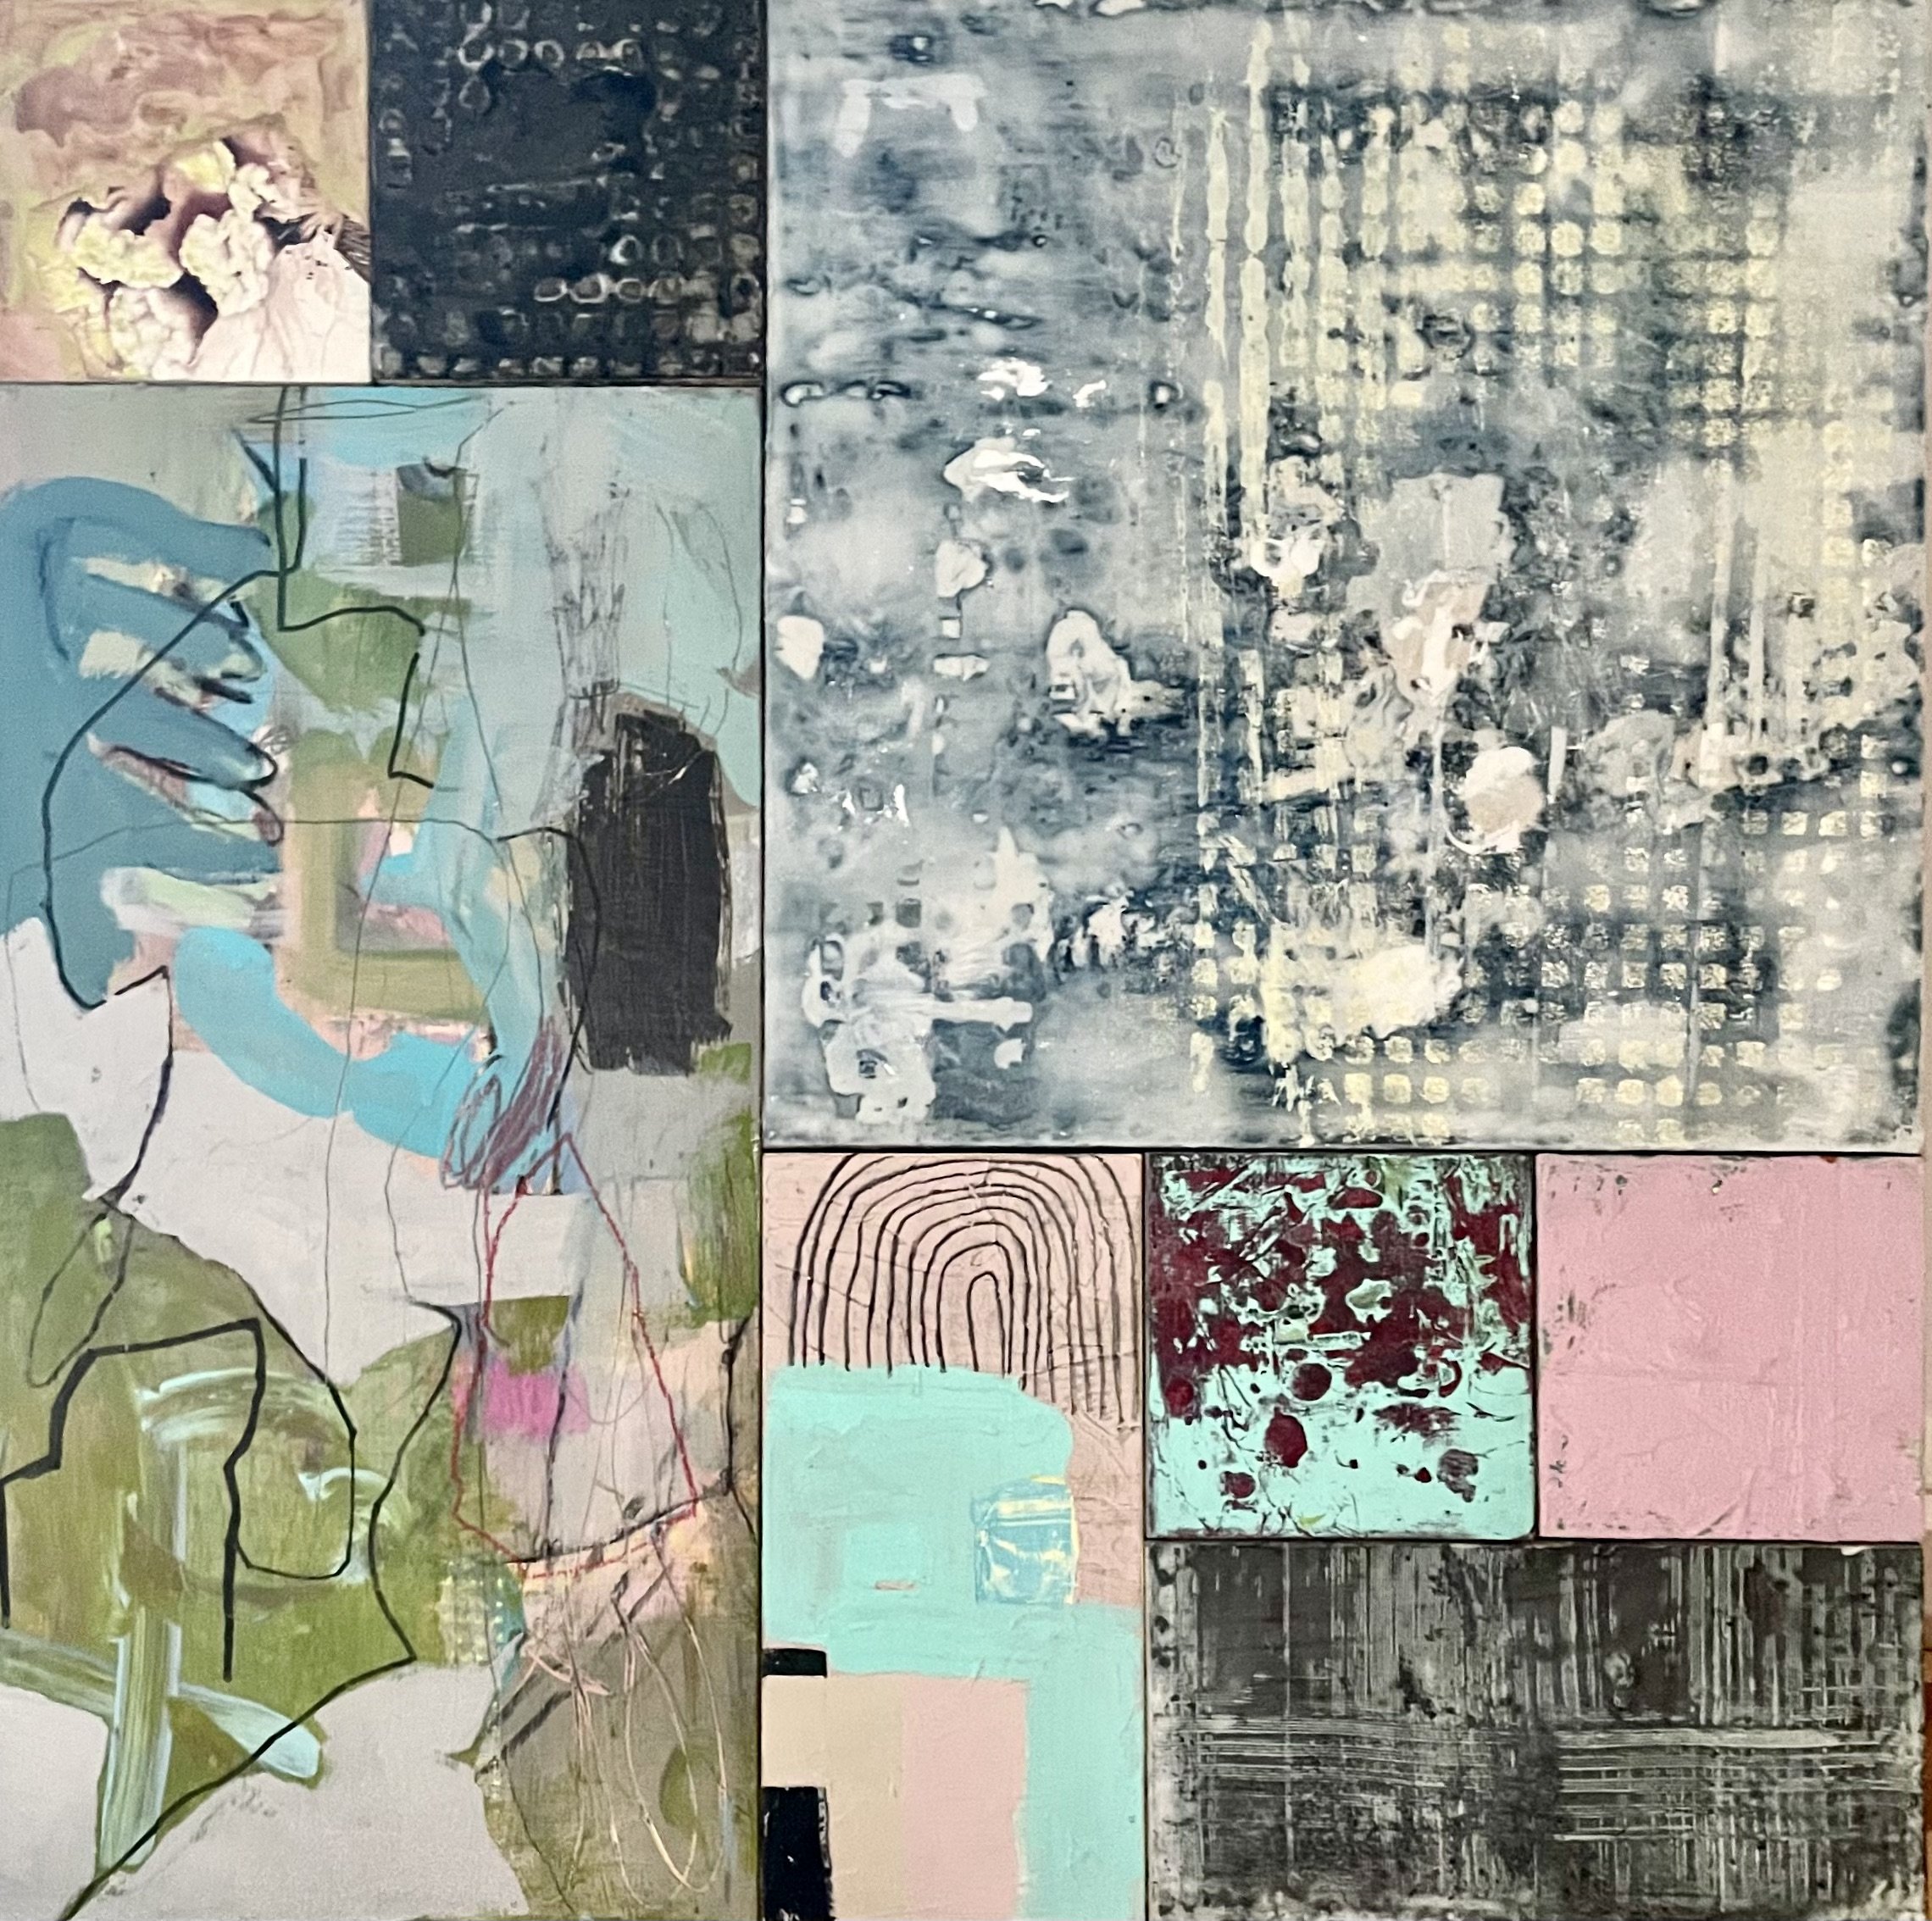  Collaboration I (with encaustic artist, Brent Arnold) Encaustic and mixed media on multiple wood panels 